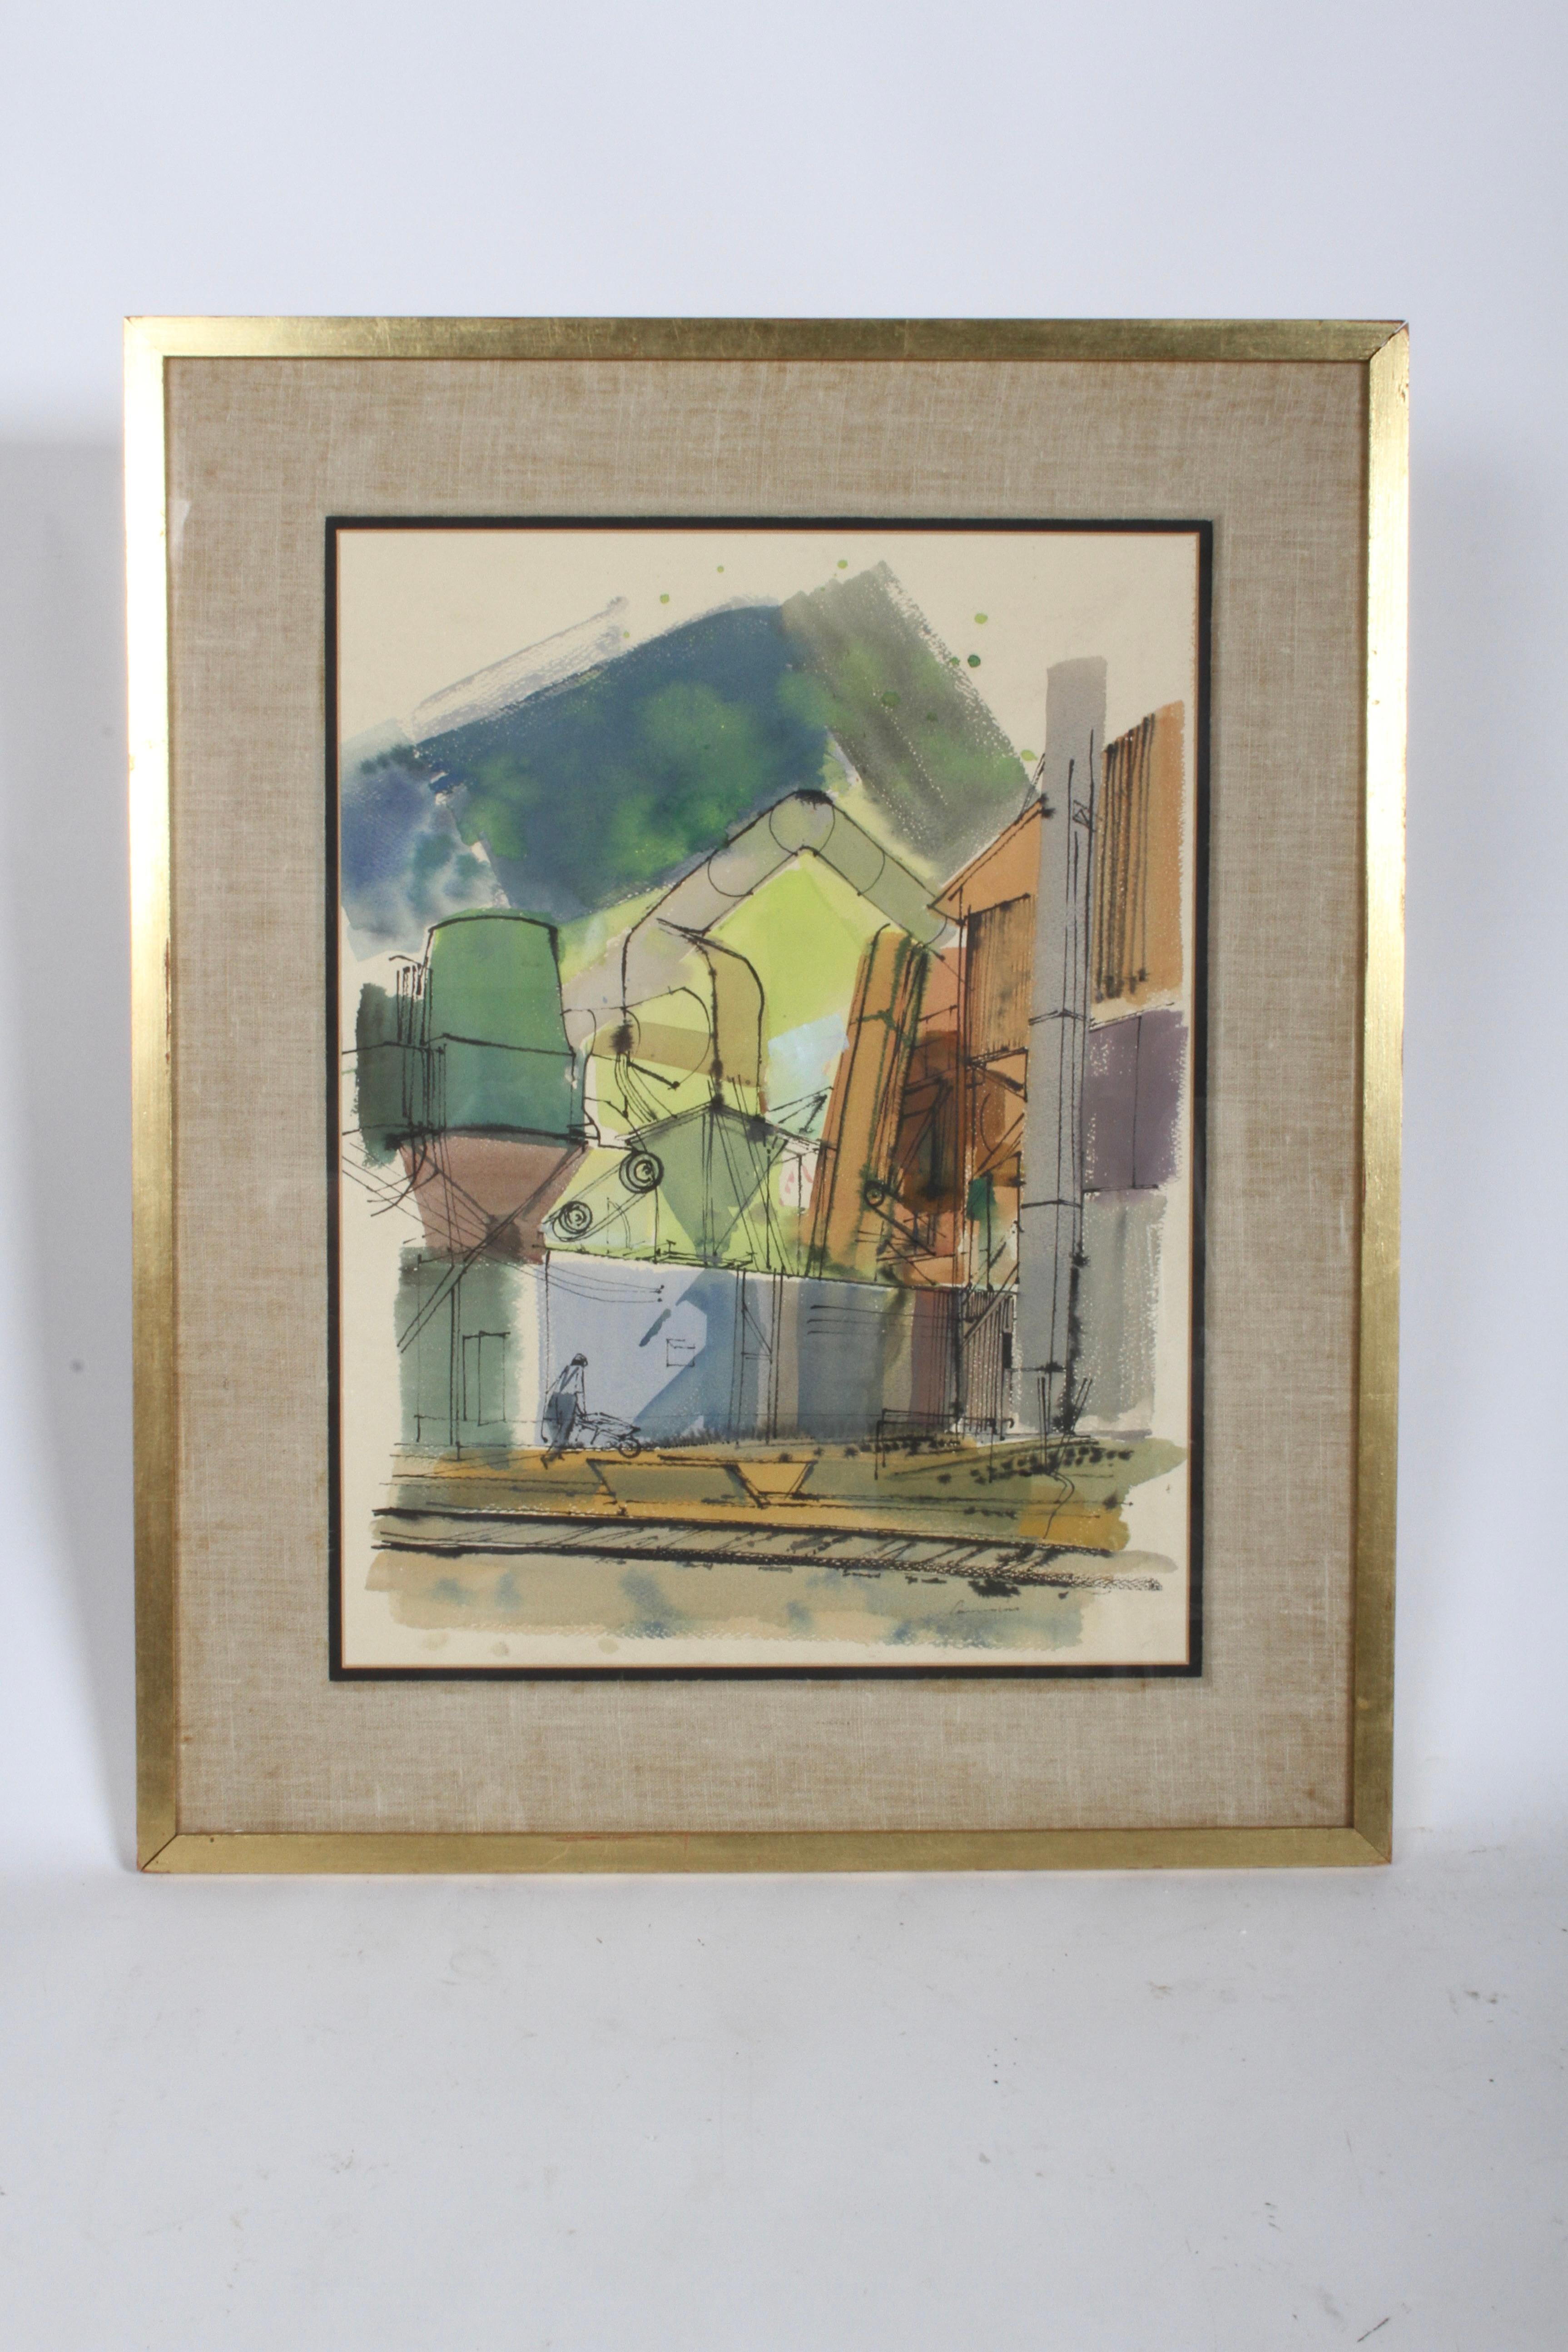 Colorful Mid-Century Architectural or Industrial manufacturing scene watercolor of a plant , illustrating the building , smokestack, hoppers , railroad tracks and man pushing wheelbarrow. In older gold frame, with double mat. Art dims 16